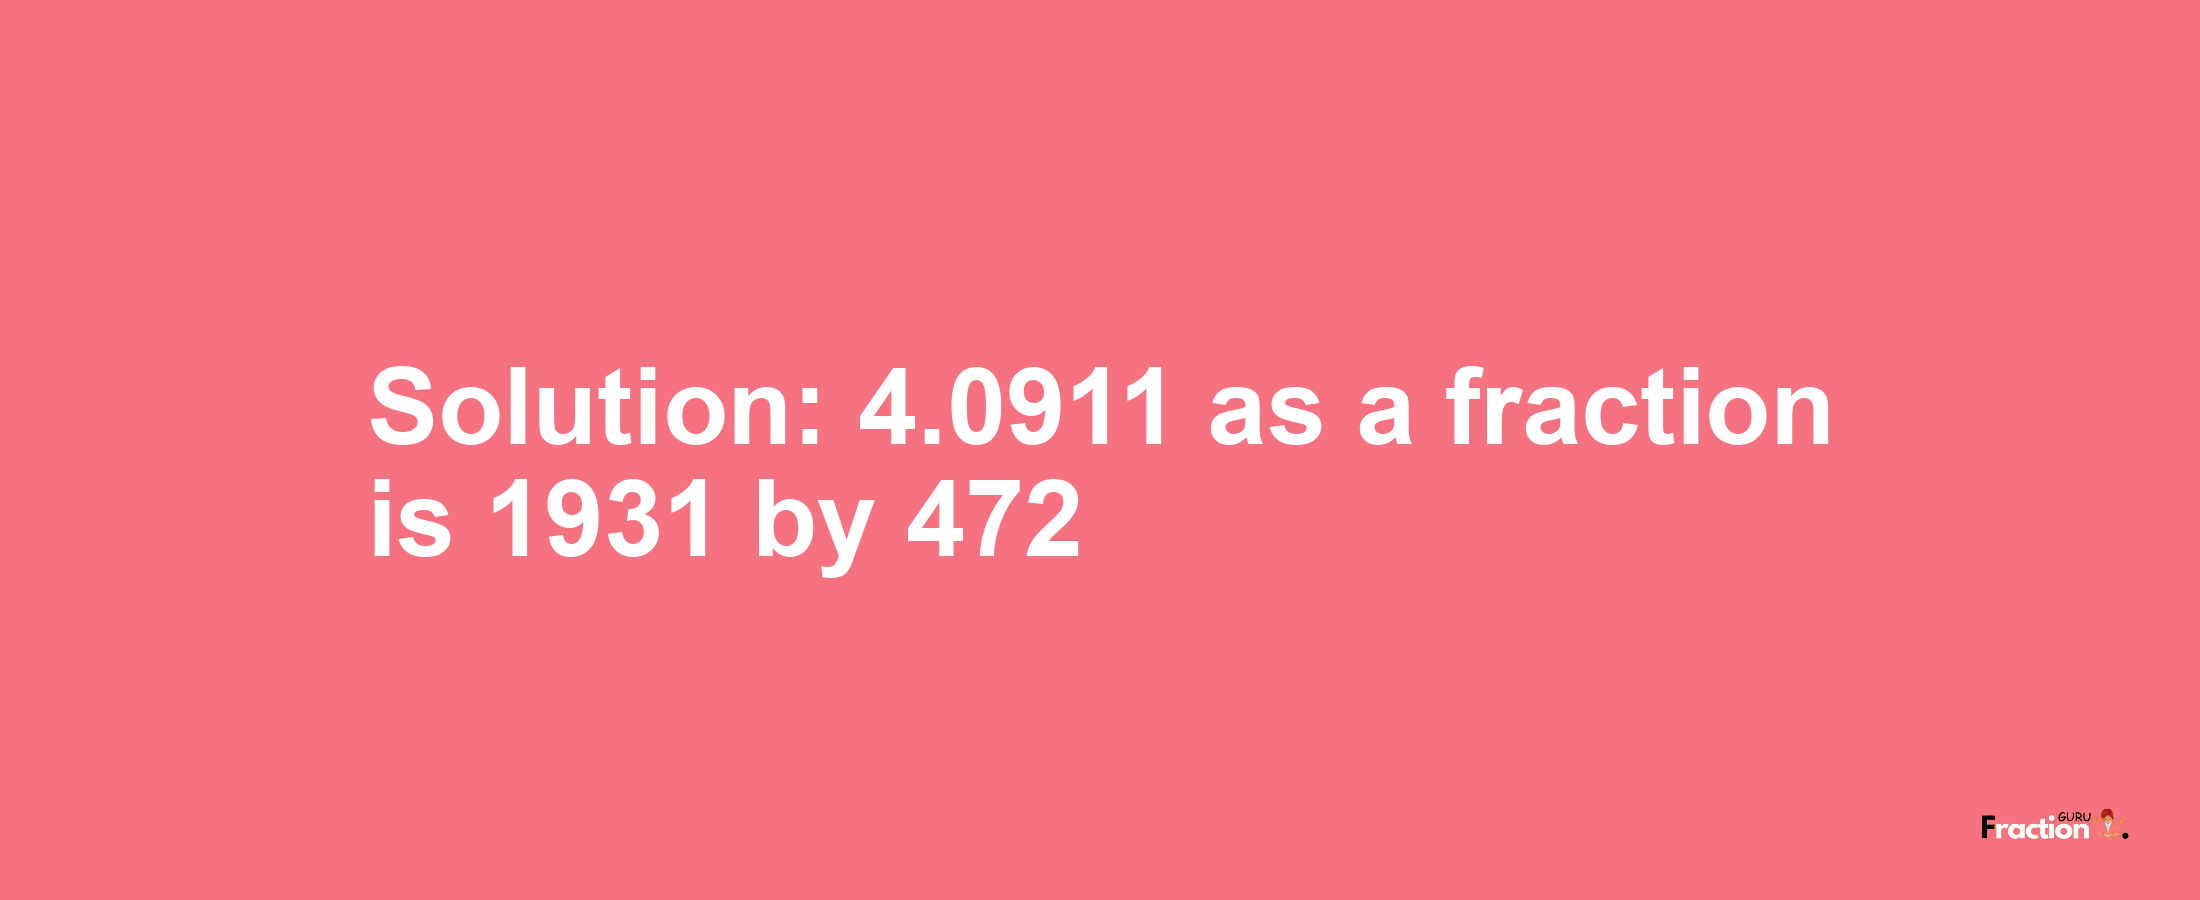 Solution:4.0911 as a fraction is 1931/472